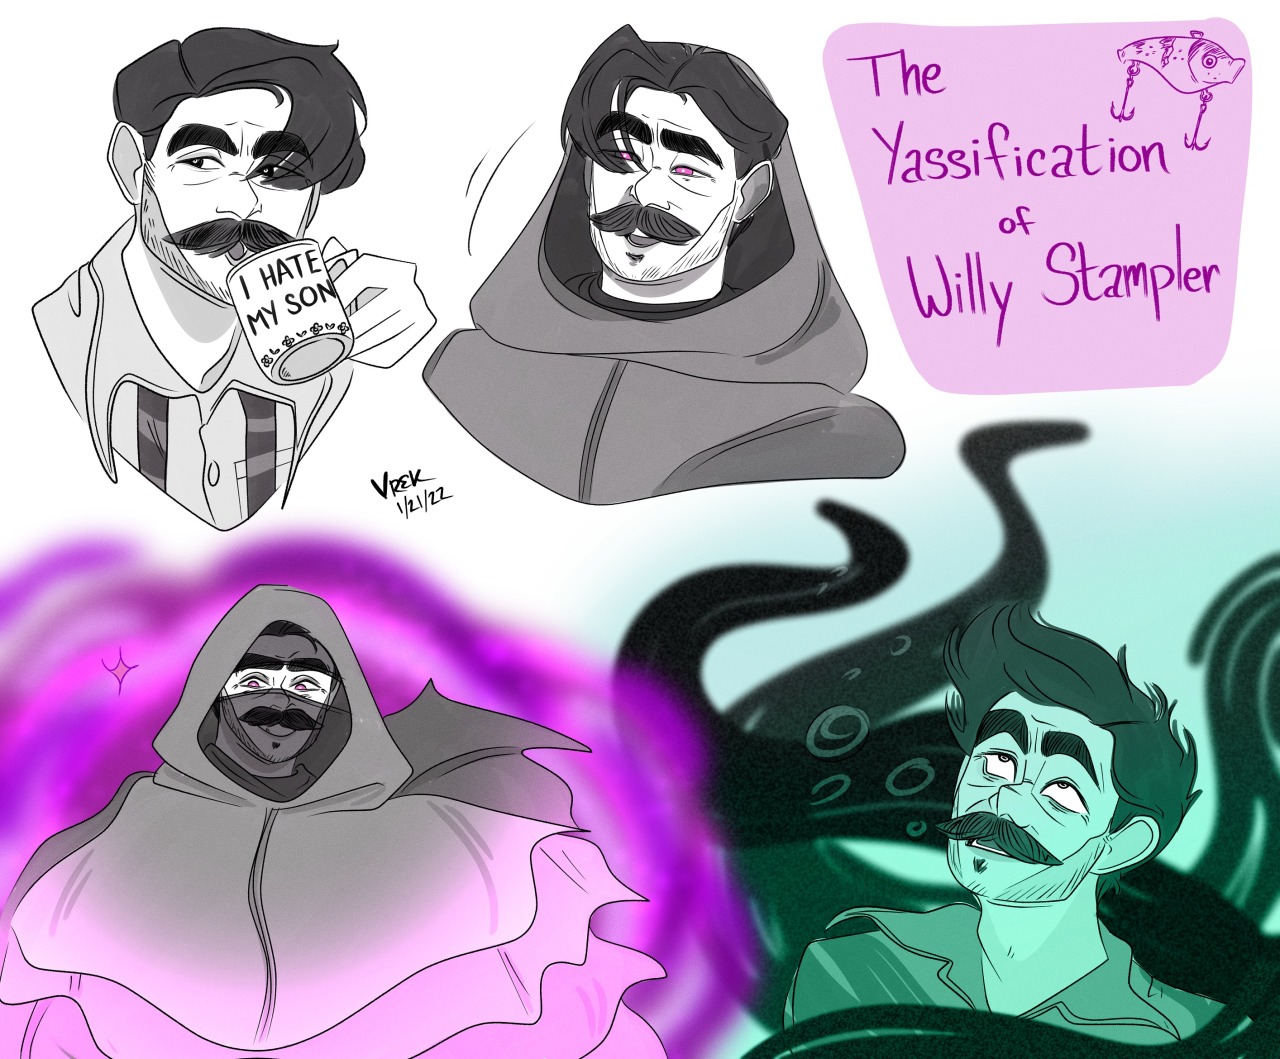 Wow! He is a bad man! (or, my character design sheet for the last of the omega dads, the very mean and downright frightening Willy Stampler himself) #dungeons and daddies #dndads#dndads fanart#willy stampler#dnd#fanart#podcast #i kind of drew inspo from clayton from tarzan and that evil guy from Spirit  #his hair is similar to rons but longer; like in the 1950s when businessmen had their hair slicked back but when they flew into a rage it  #flopped down? like that  #willy is still so so scary to me  #like my stomach DROPS whenever hes in an episode  #i wonder if hell be freed from his prison in season 2 and what that would look like  #actually all the omega dads are theoretically still alive  #right?  #im trying to remember #digital art#comic#animation#cartoon #dungeons and dragons  #me to the Doodler: lol get his ass